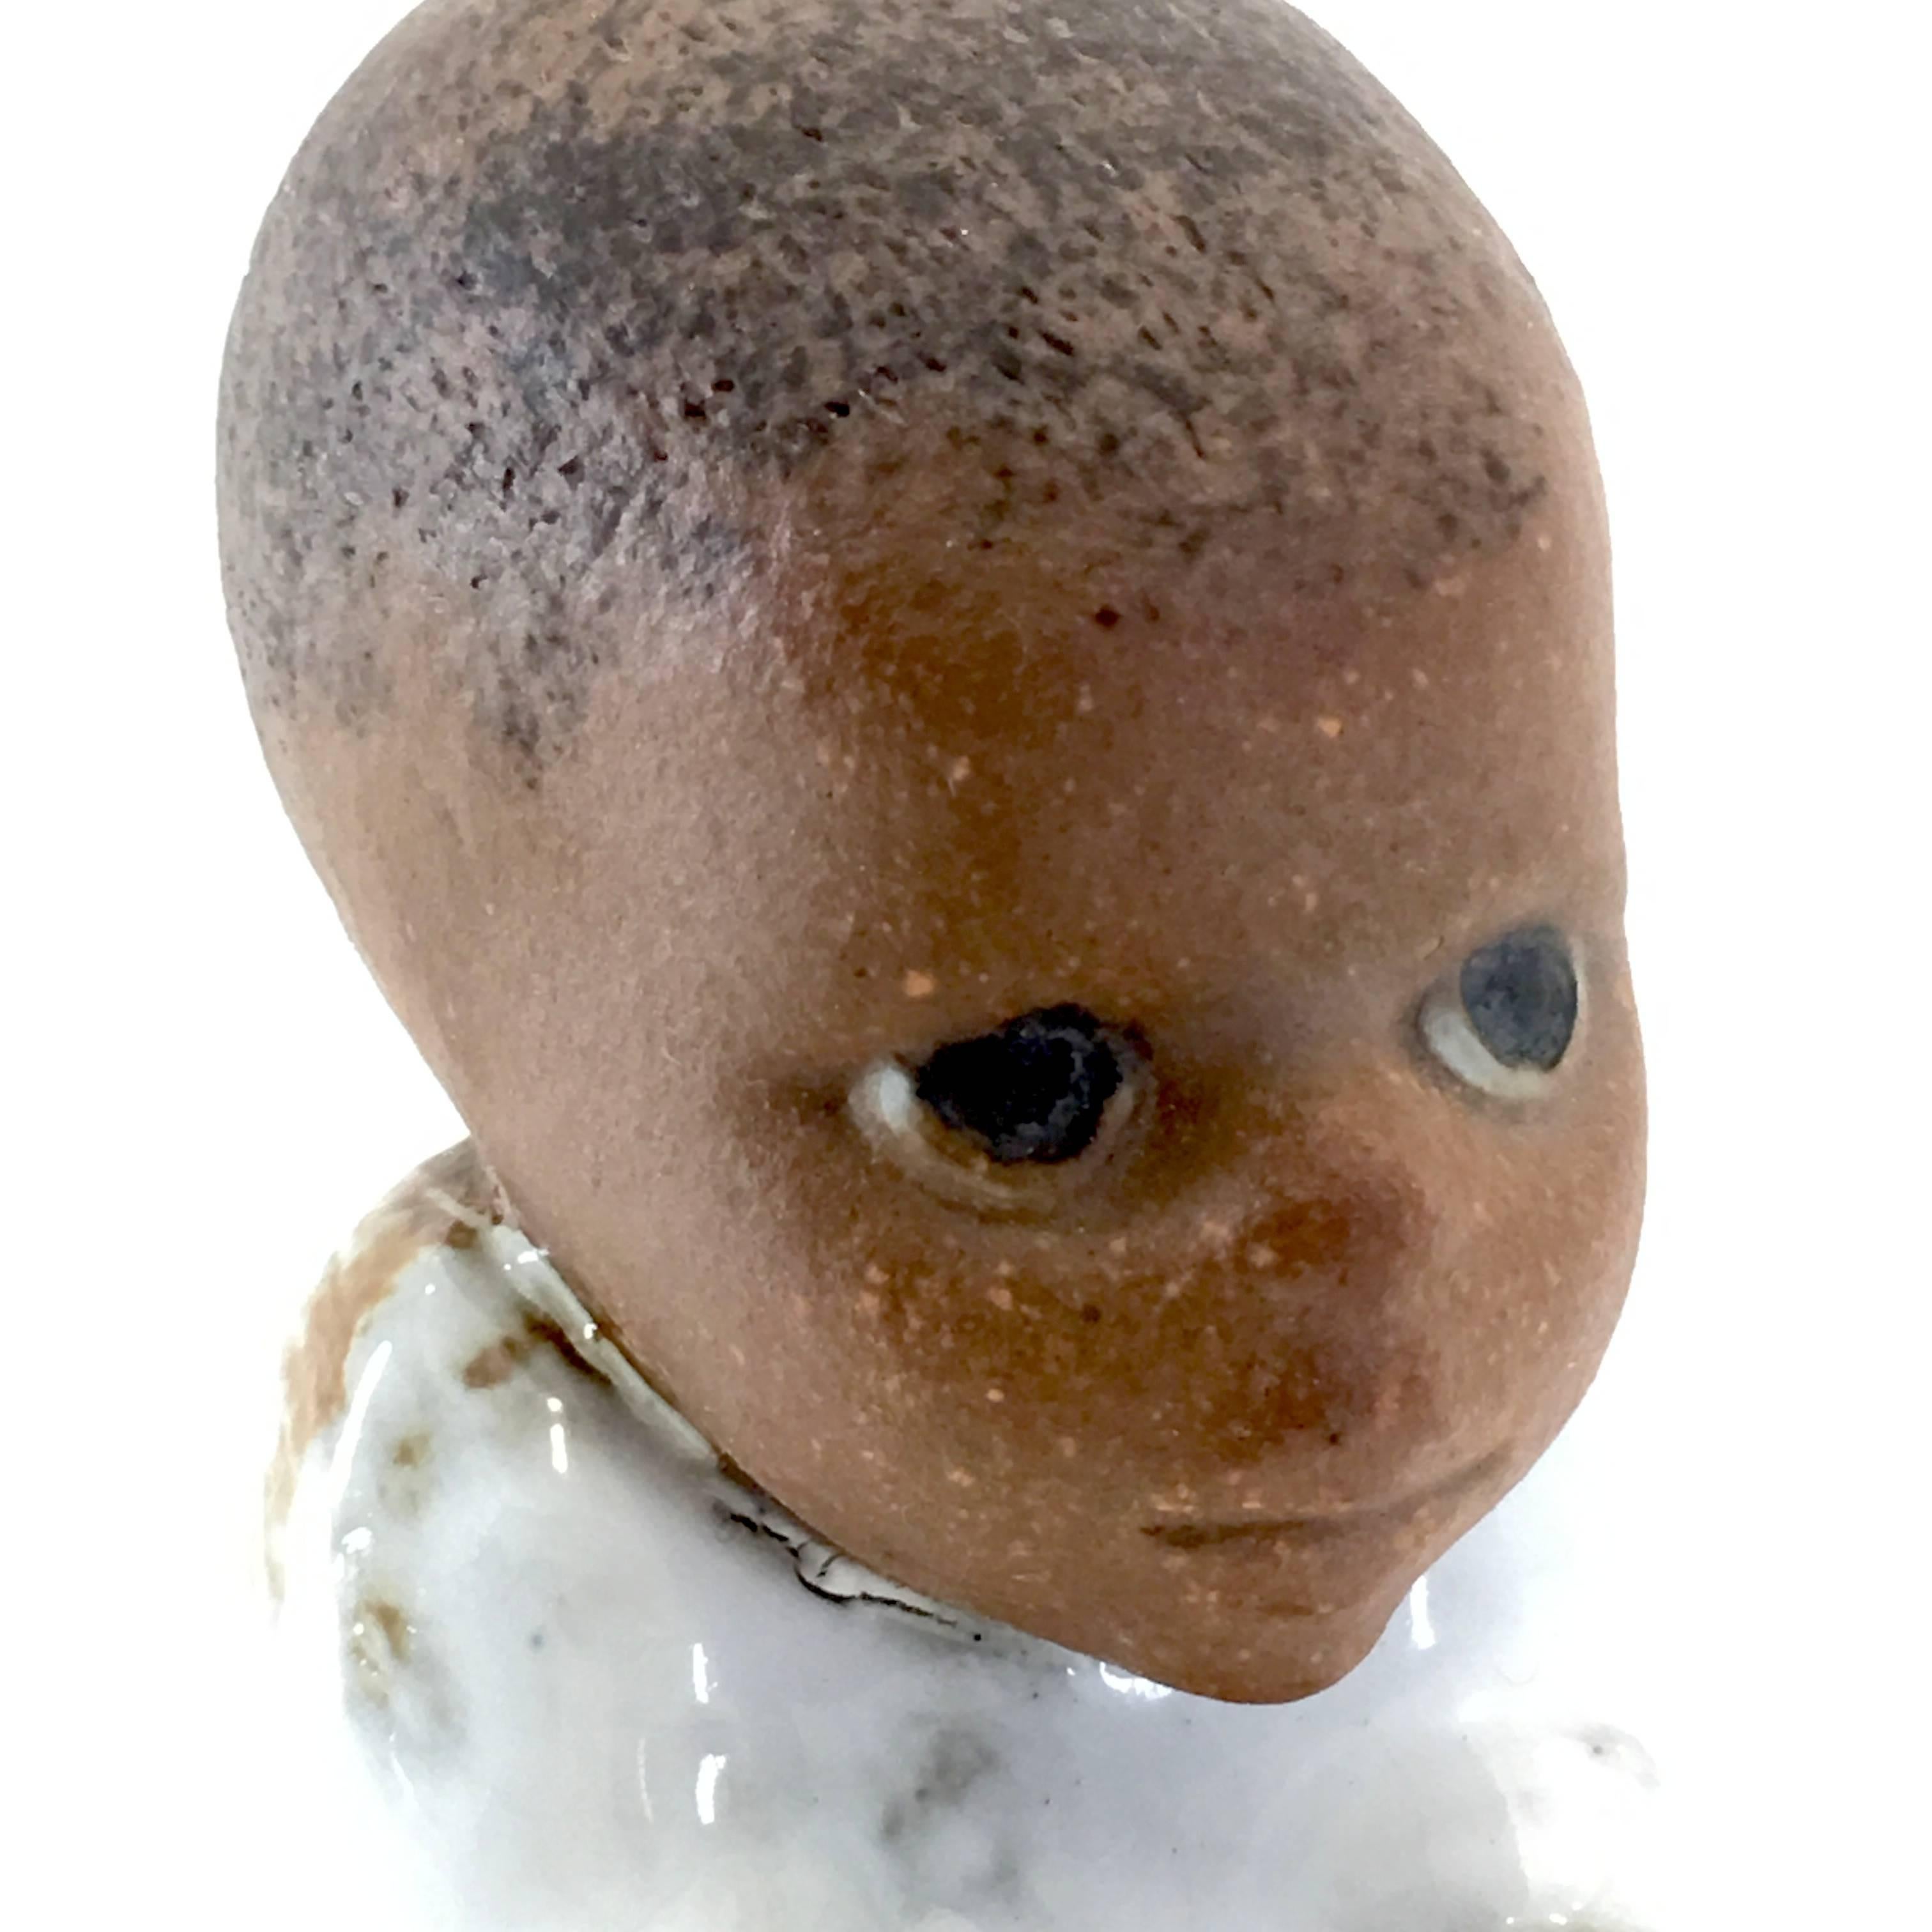 Produced in 1974 by Lisa Larson of Sweden as part of the children of the world series. Negro boy in sitting position. Material is pottery with glaze.

Measures: 4